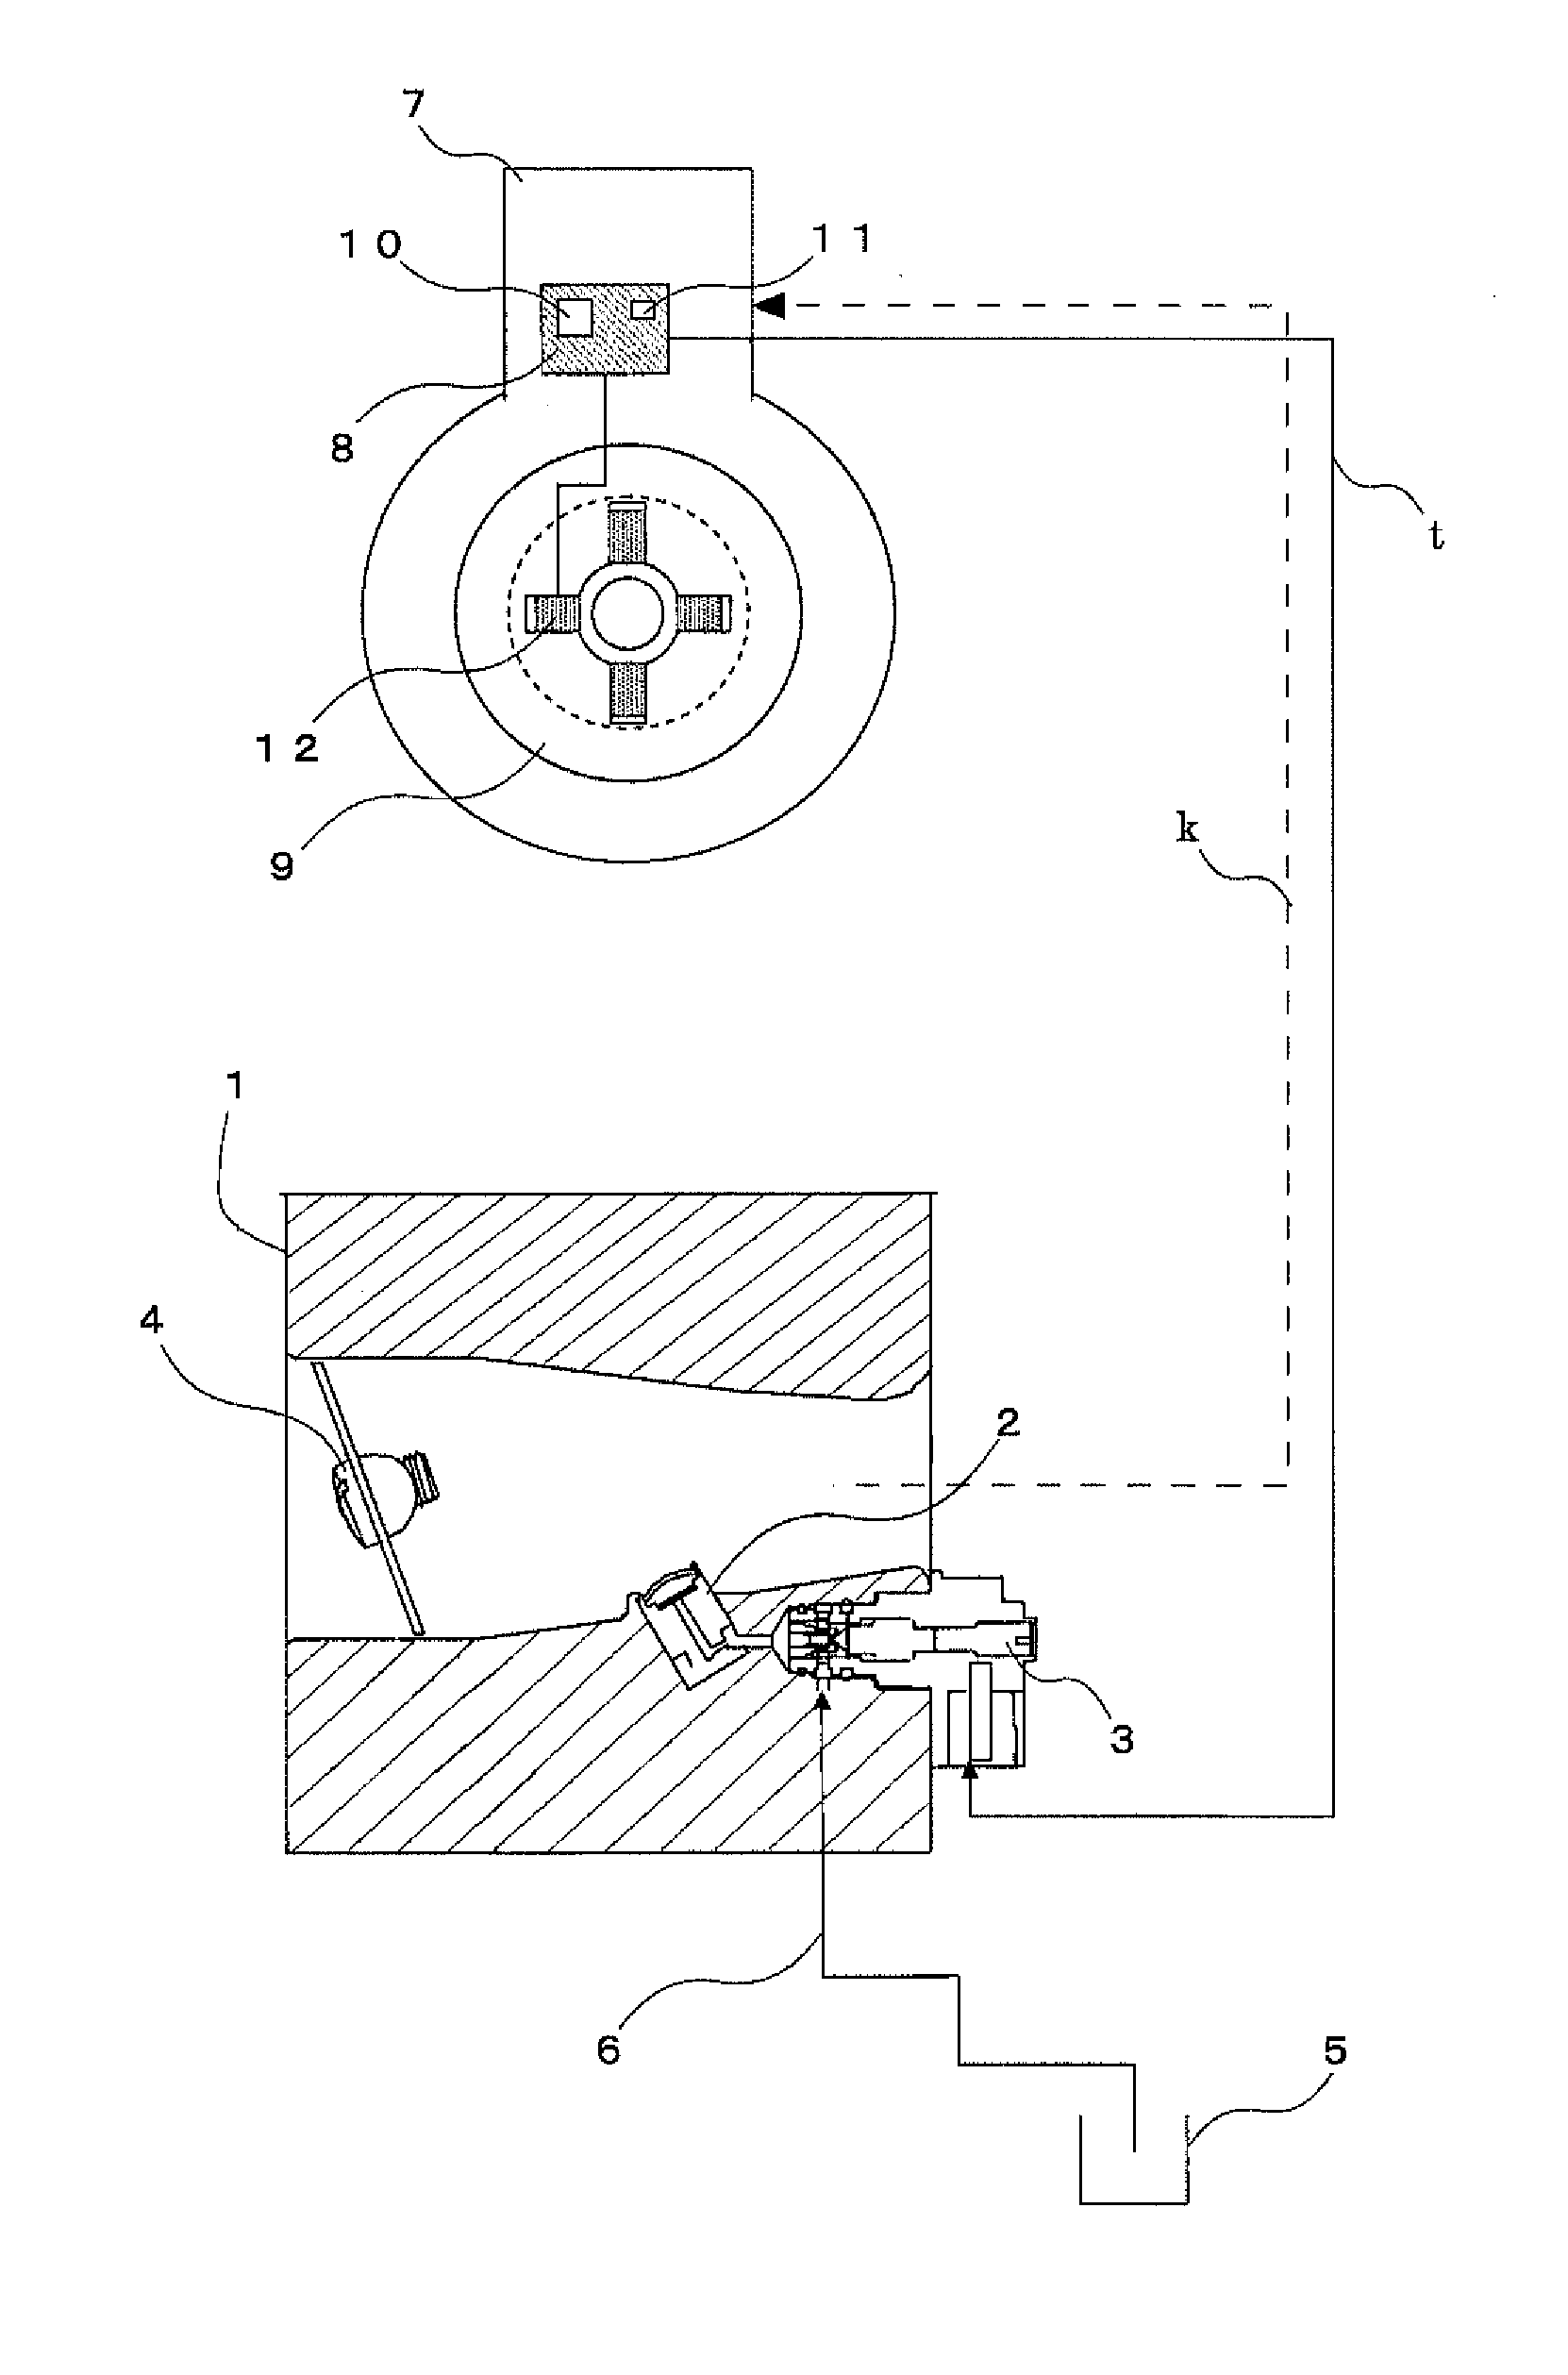 Fuel control method for hand-carried engine-driven working machine